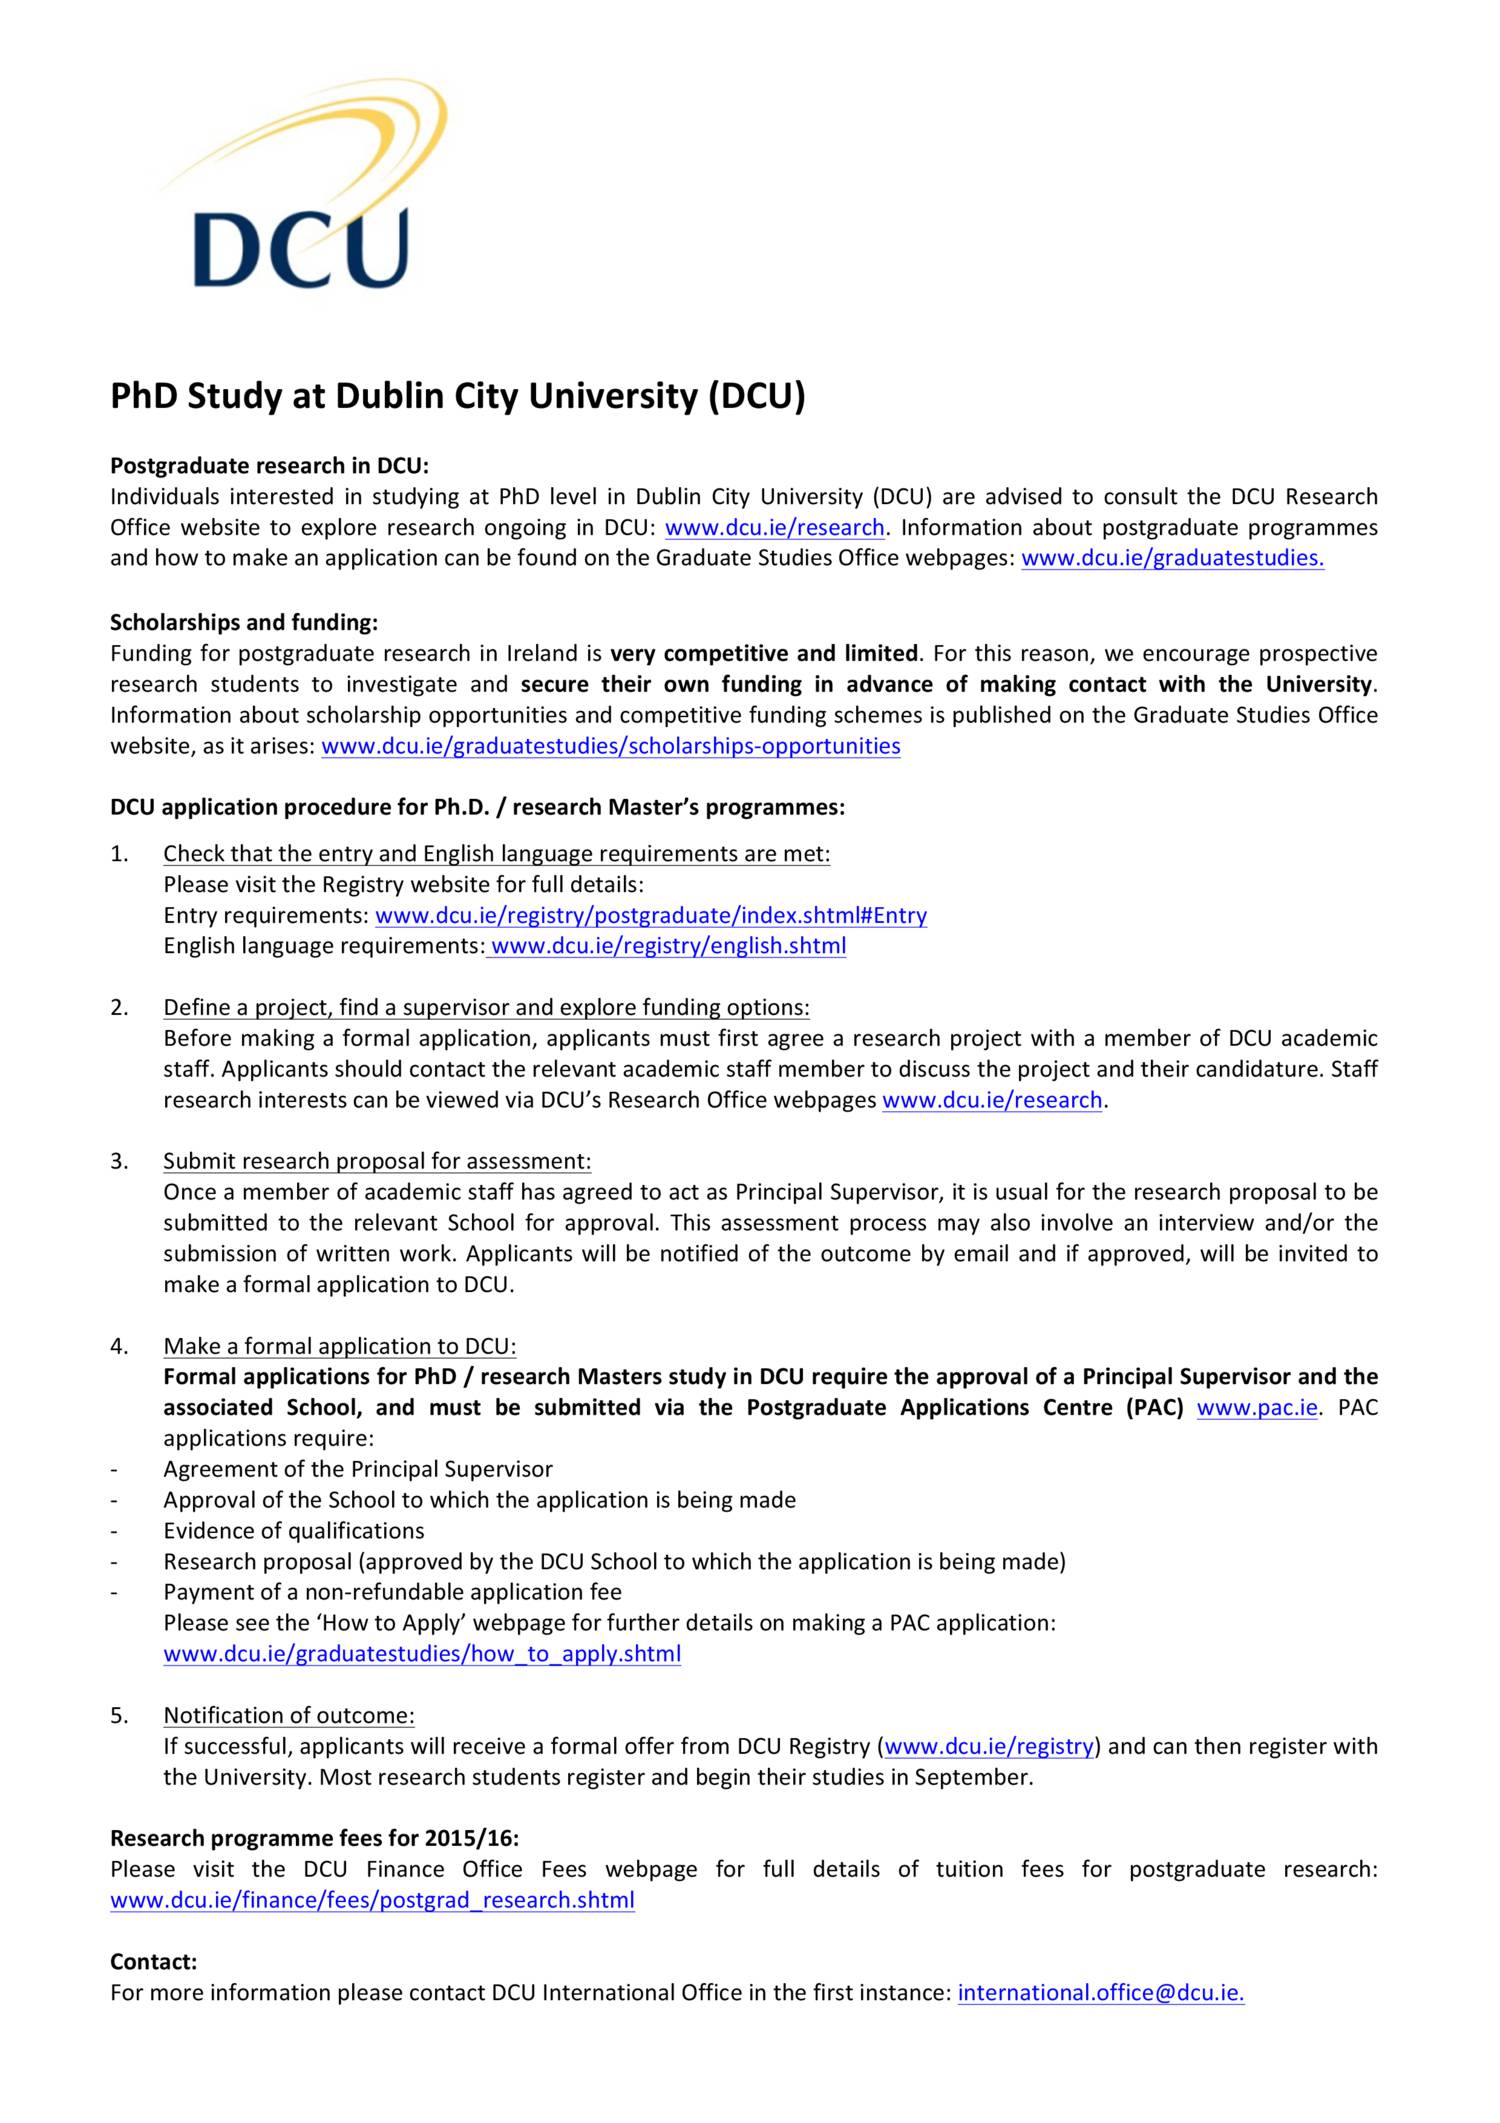 dcu phd thesis guidelines